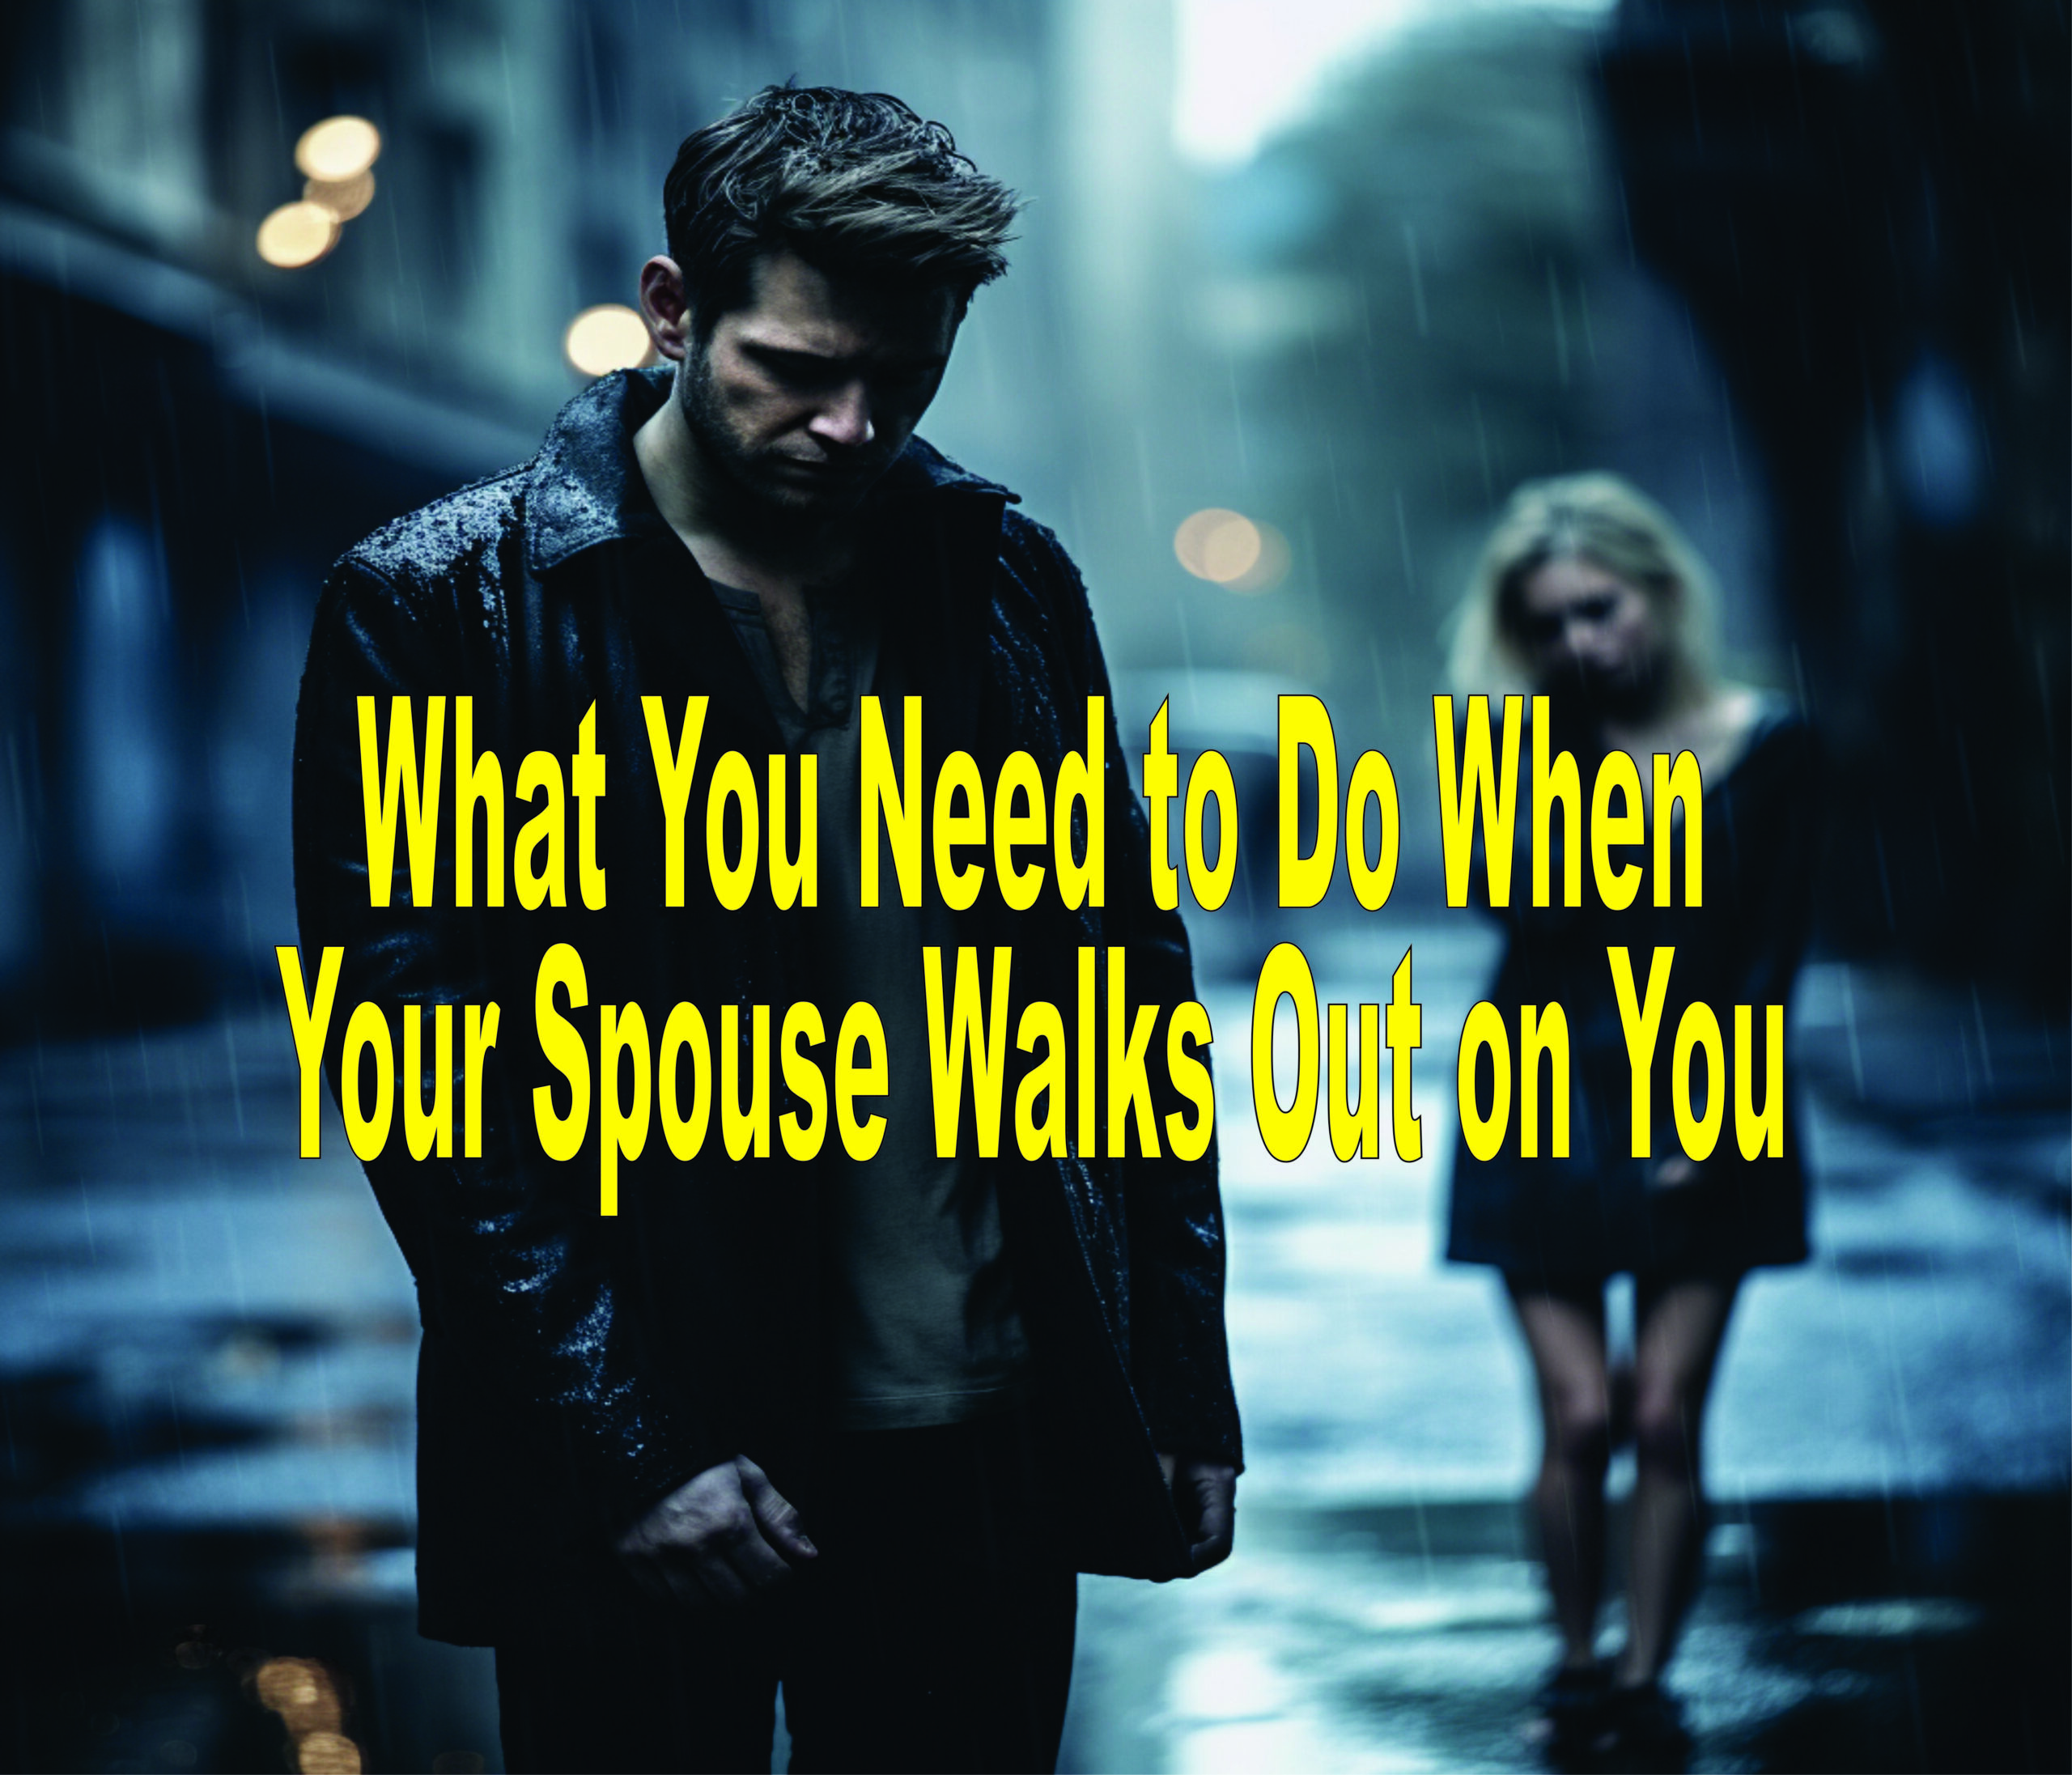 What You Need To Do When Your Spouse Walks Out On You